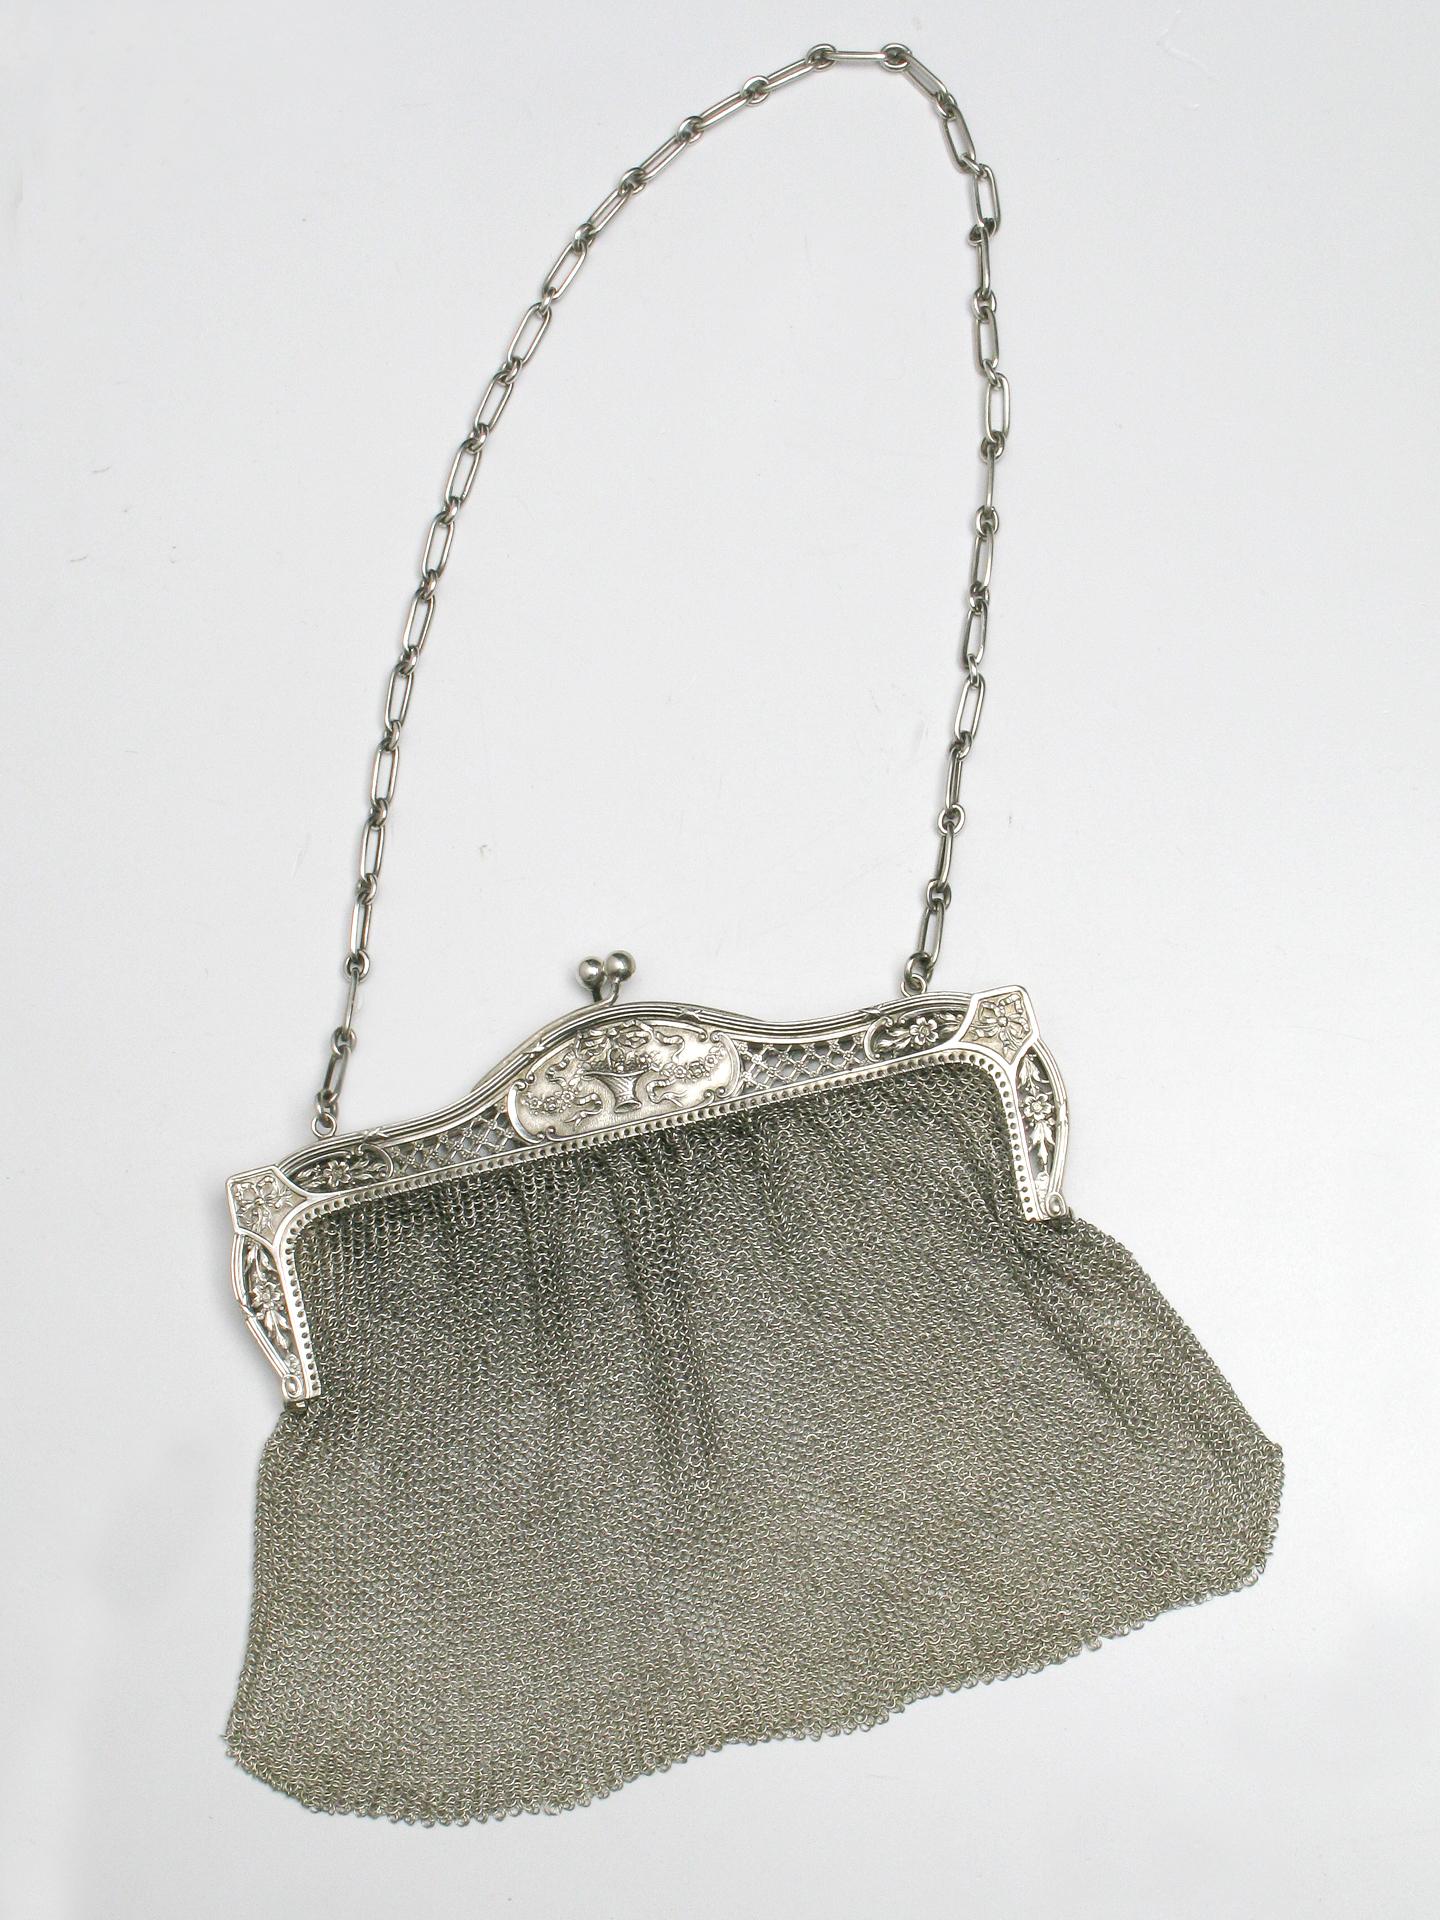 G/409 - A very antique beautiful perfect little bag in silver mesh for your evenings.
It's so elegant!  Beautiful to admire or for a woman You love.